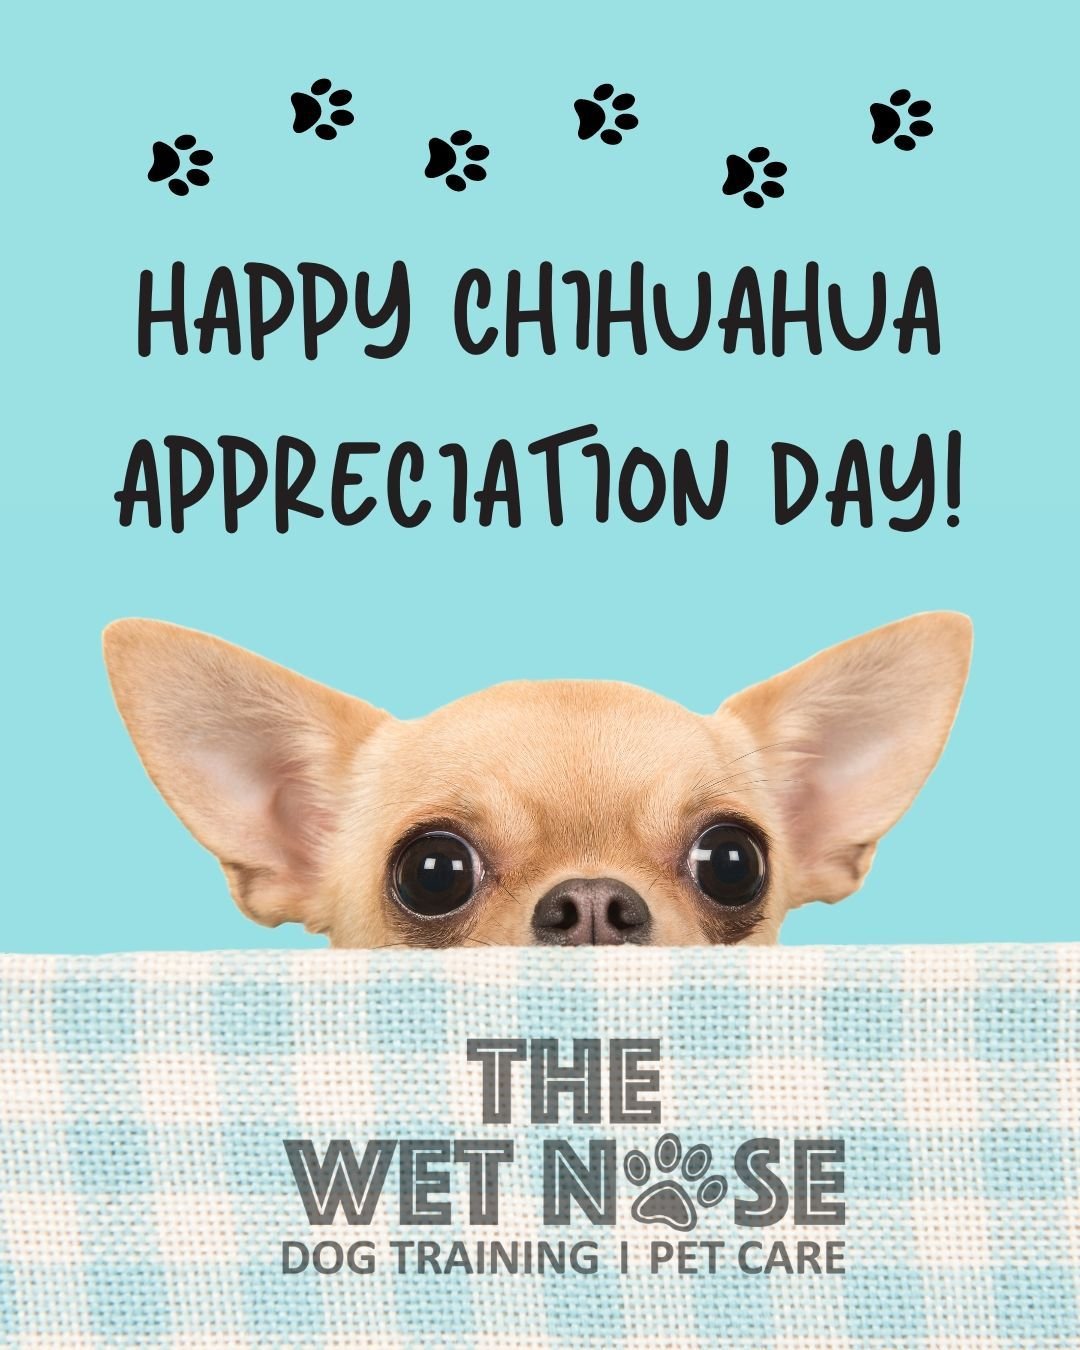 💖 Show some love to the little pups in your life today and every day!  We are happy to celebrate Chihuahua Appreciation Day today! Chihuahuas are a versatile and popular breed, and in honor of today, we'd like to share some facts about these little 